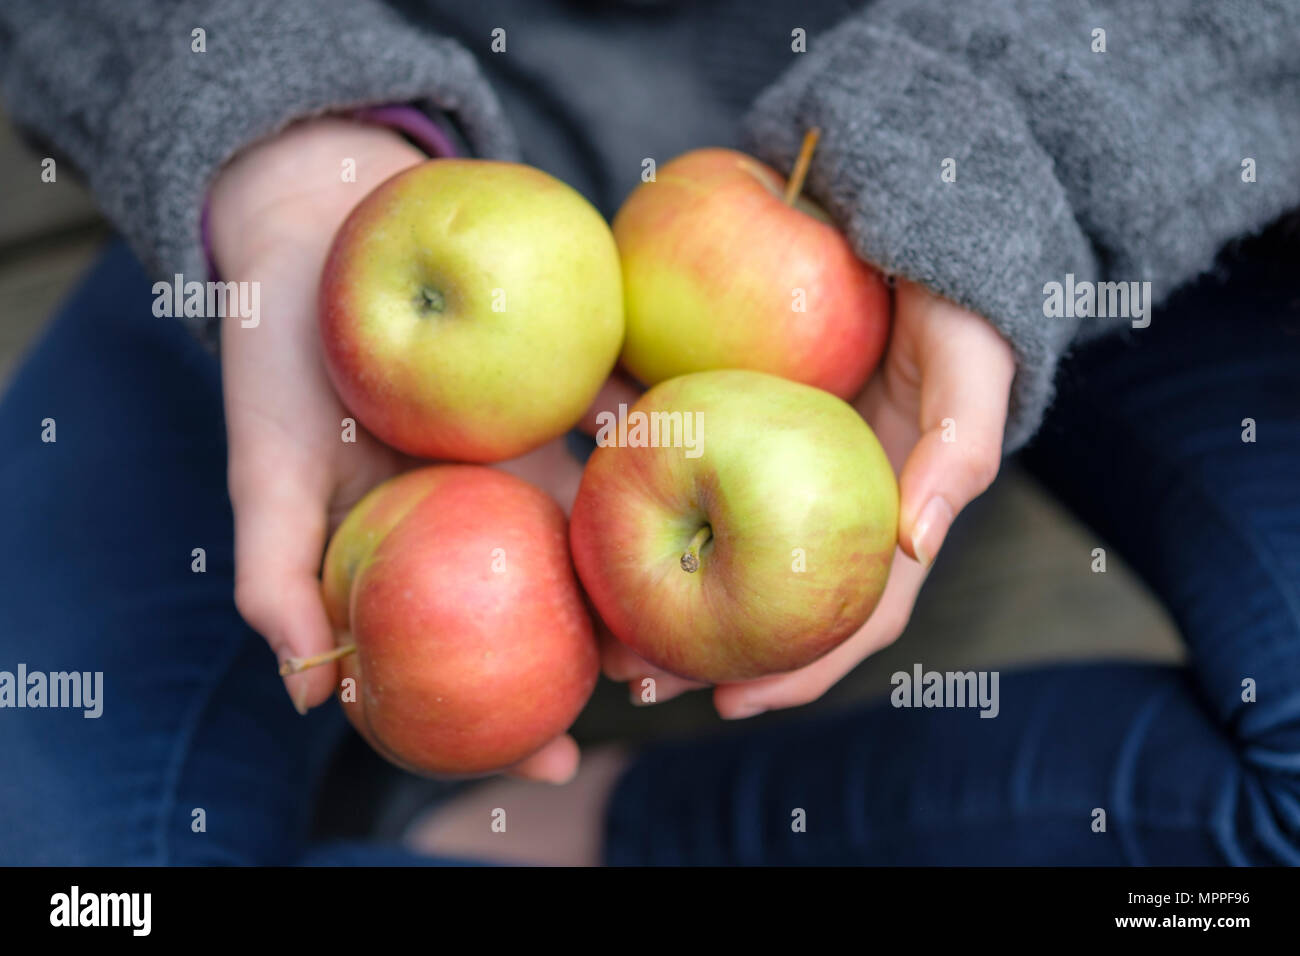 Hands holding four apples, close-up Stock Photo